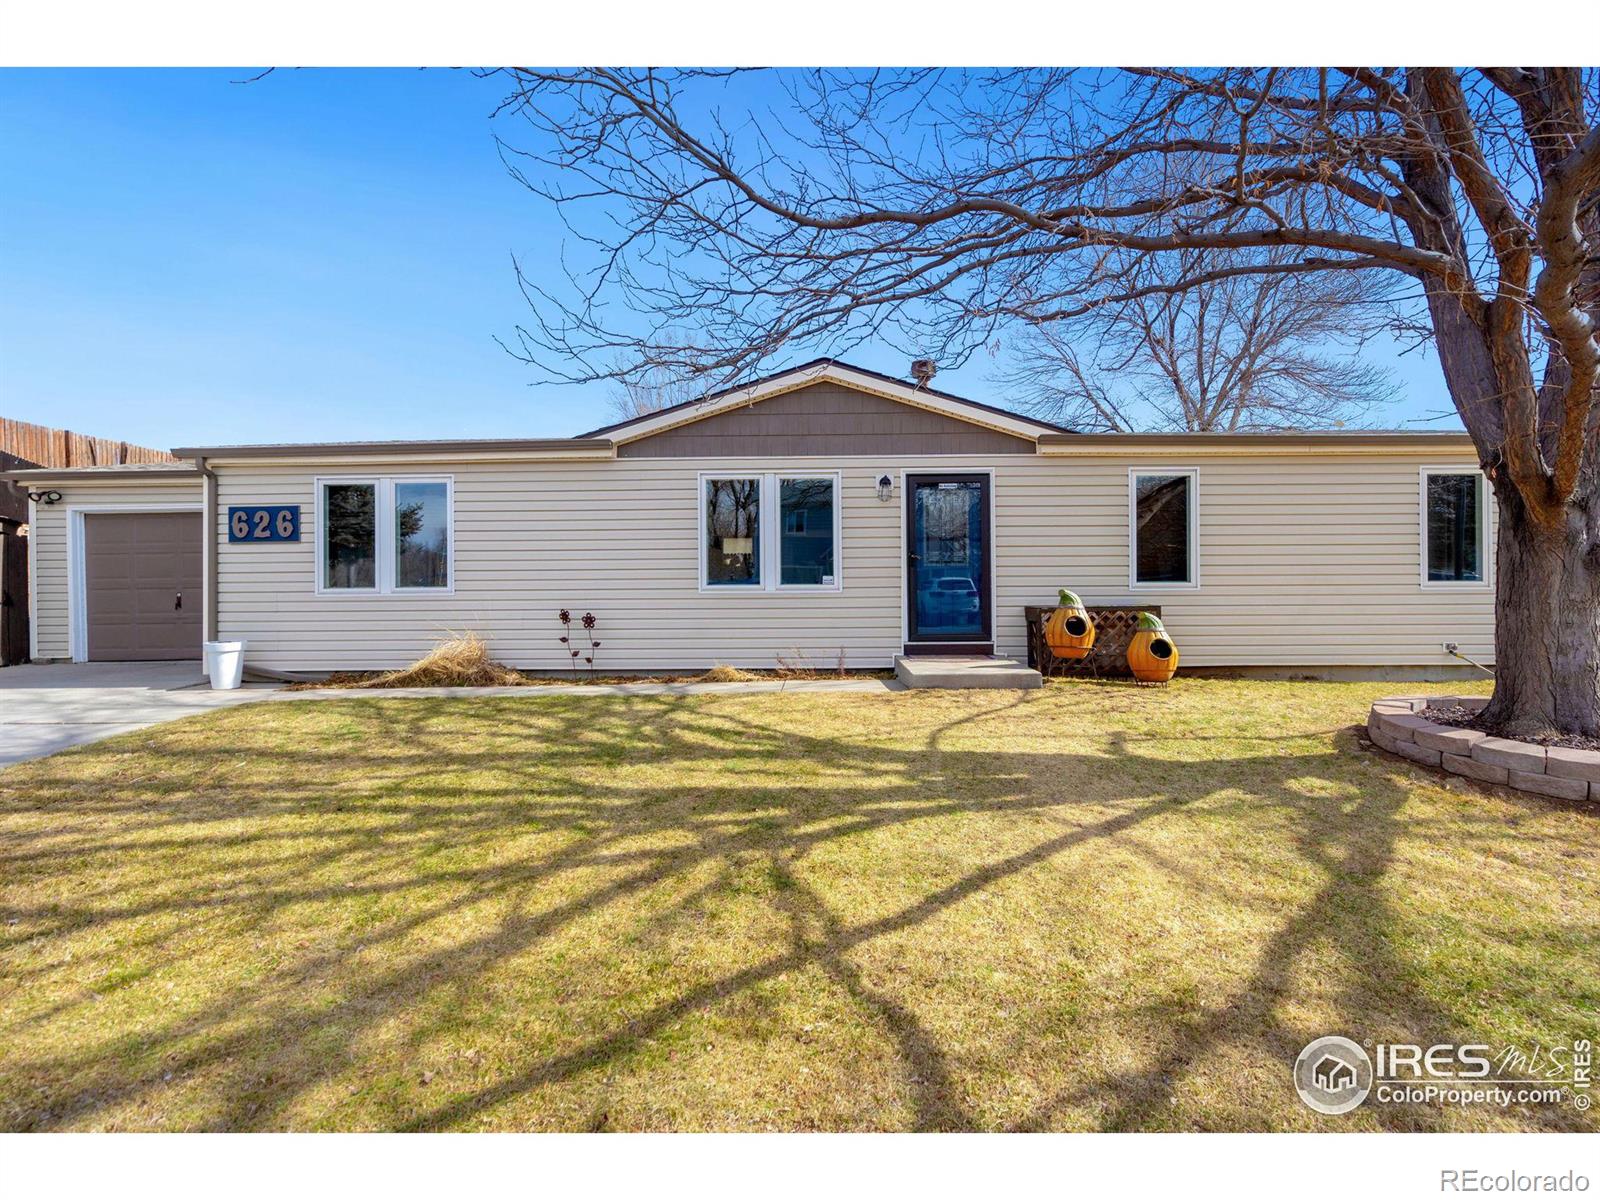 Report Image for 626  10th Street,Fort Collins, Colorado